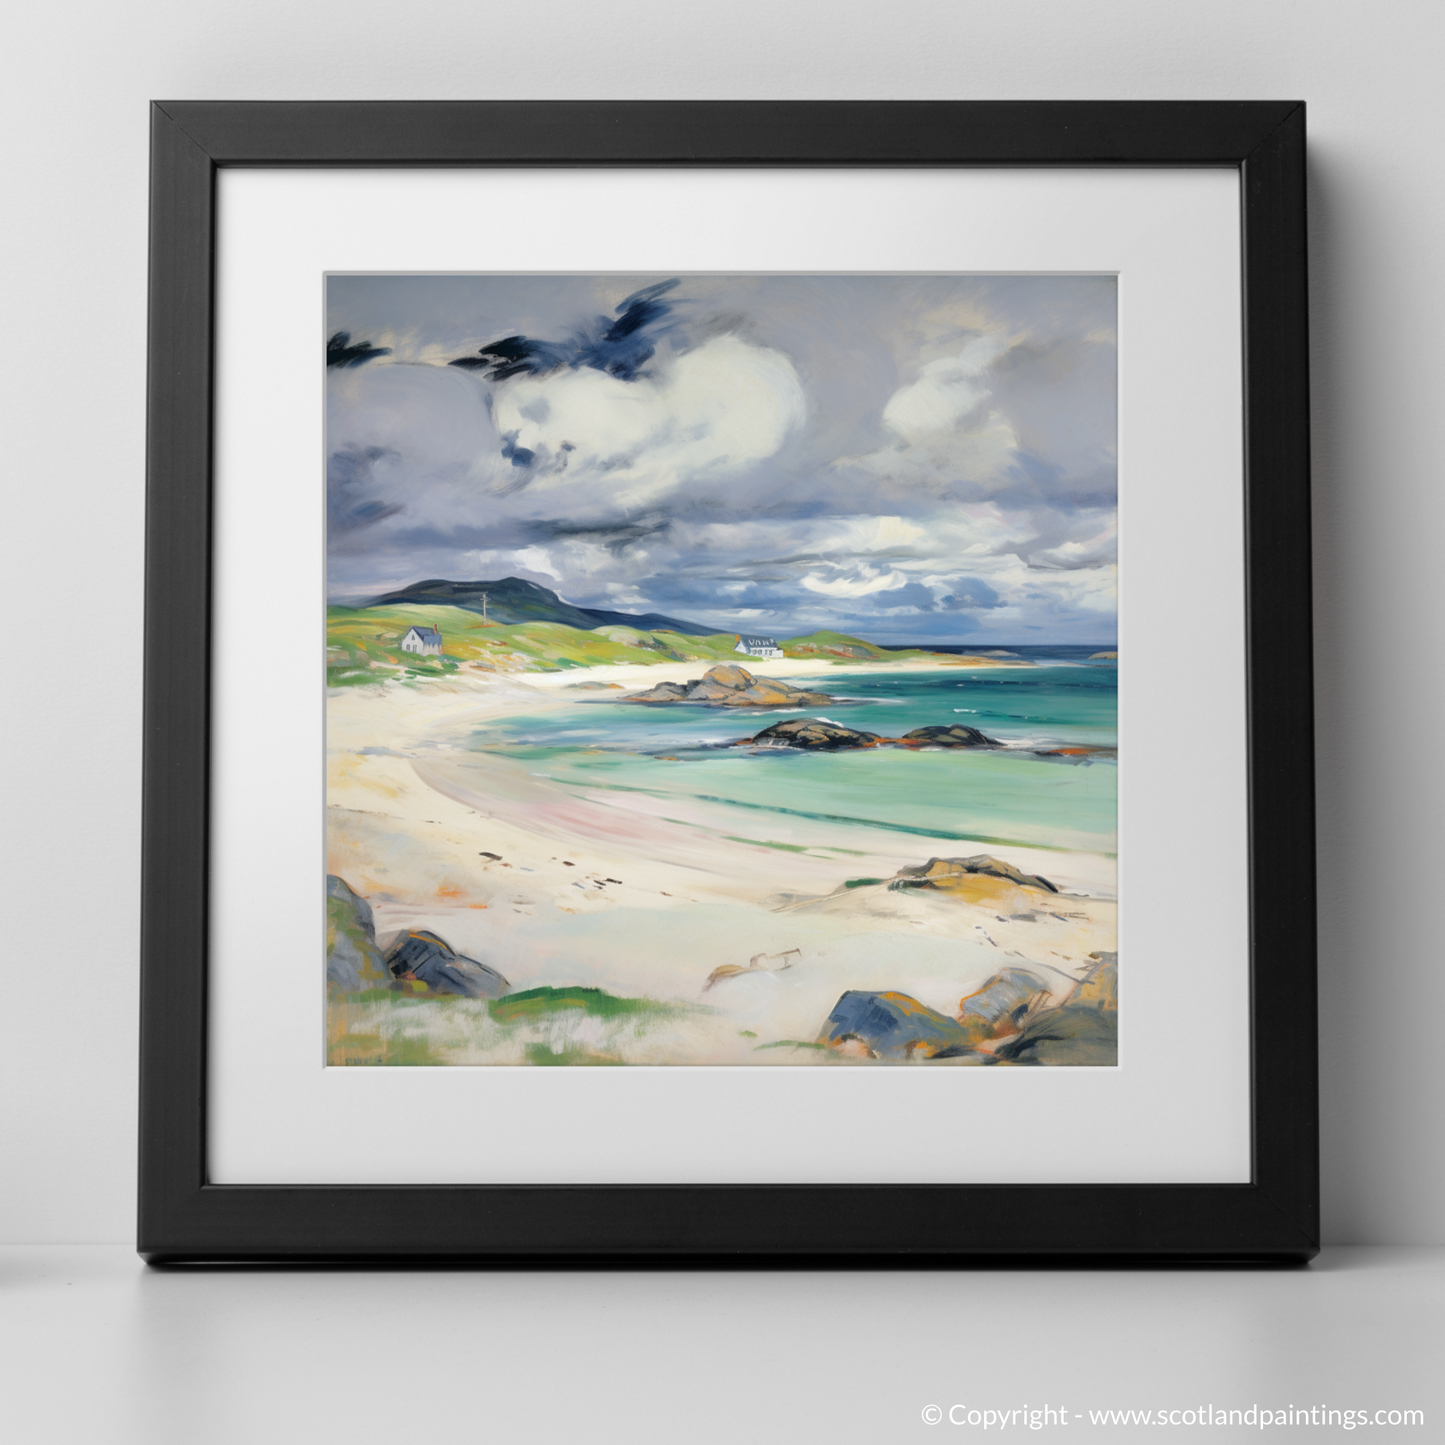 Storm Over Achmelvich Bay: An Impressionist's Dance